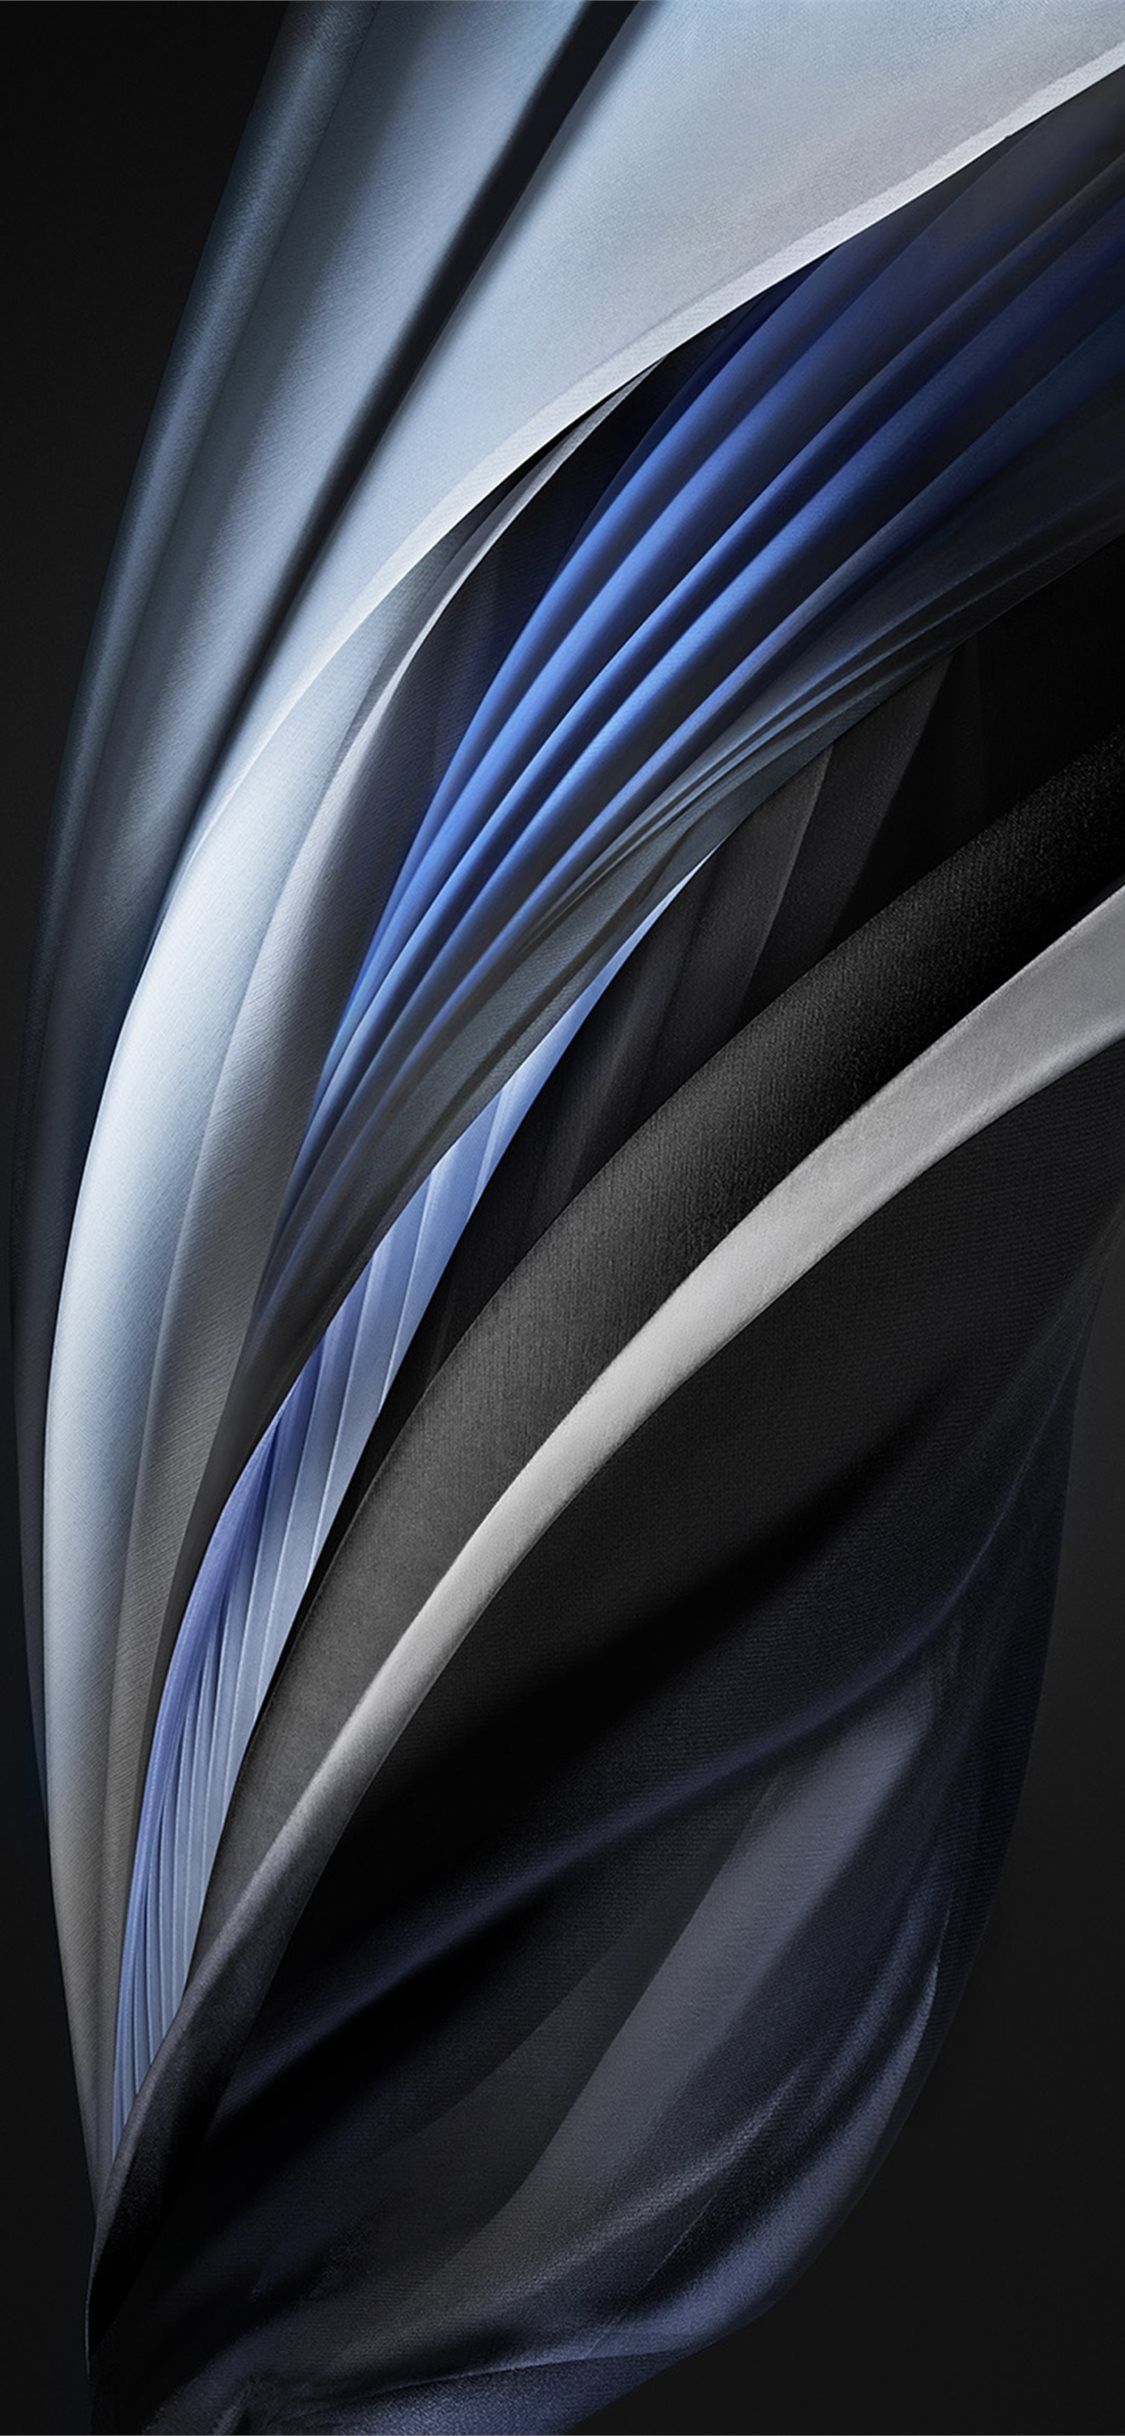 An abstract image of blue and black lines - Silver